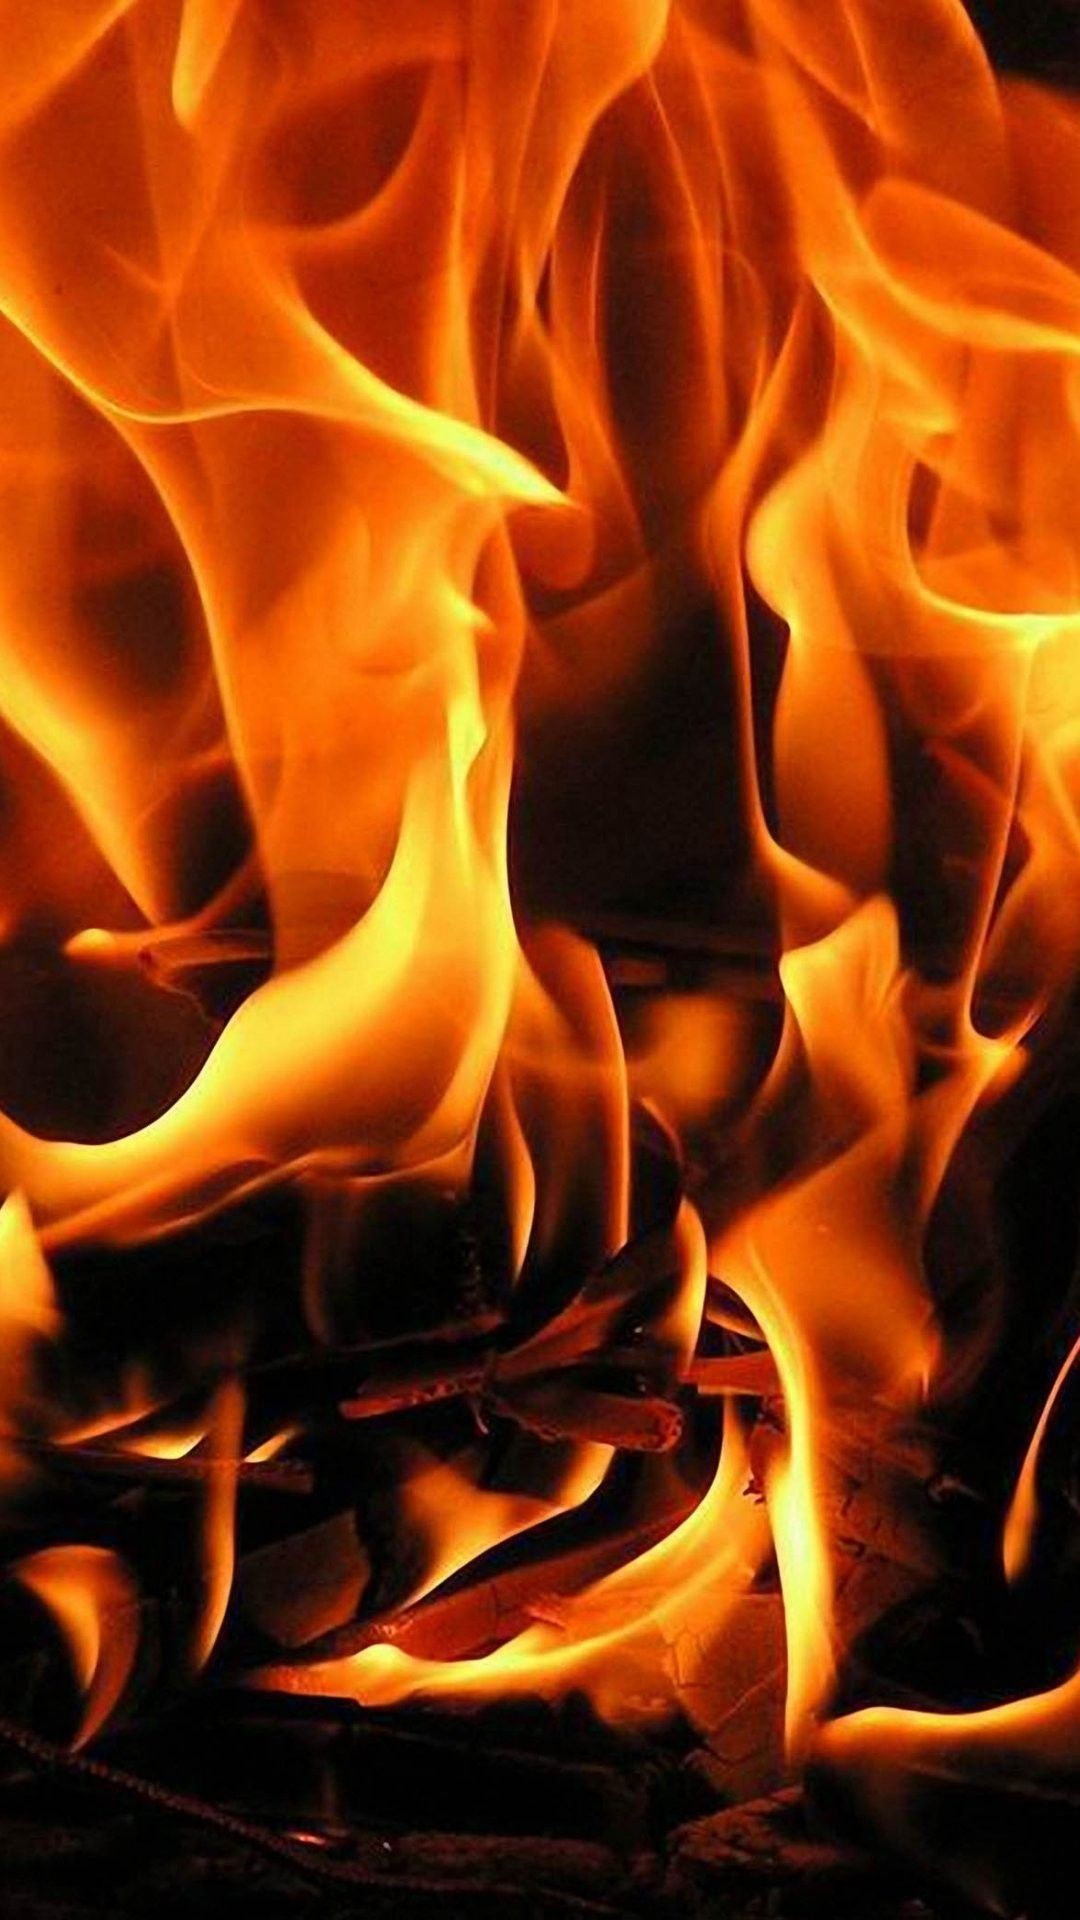 Fire aesthetic flame Wallpaper Download